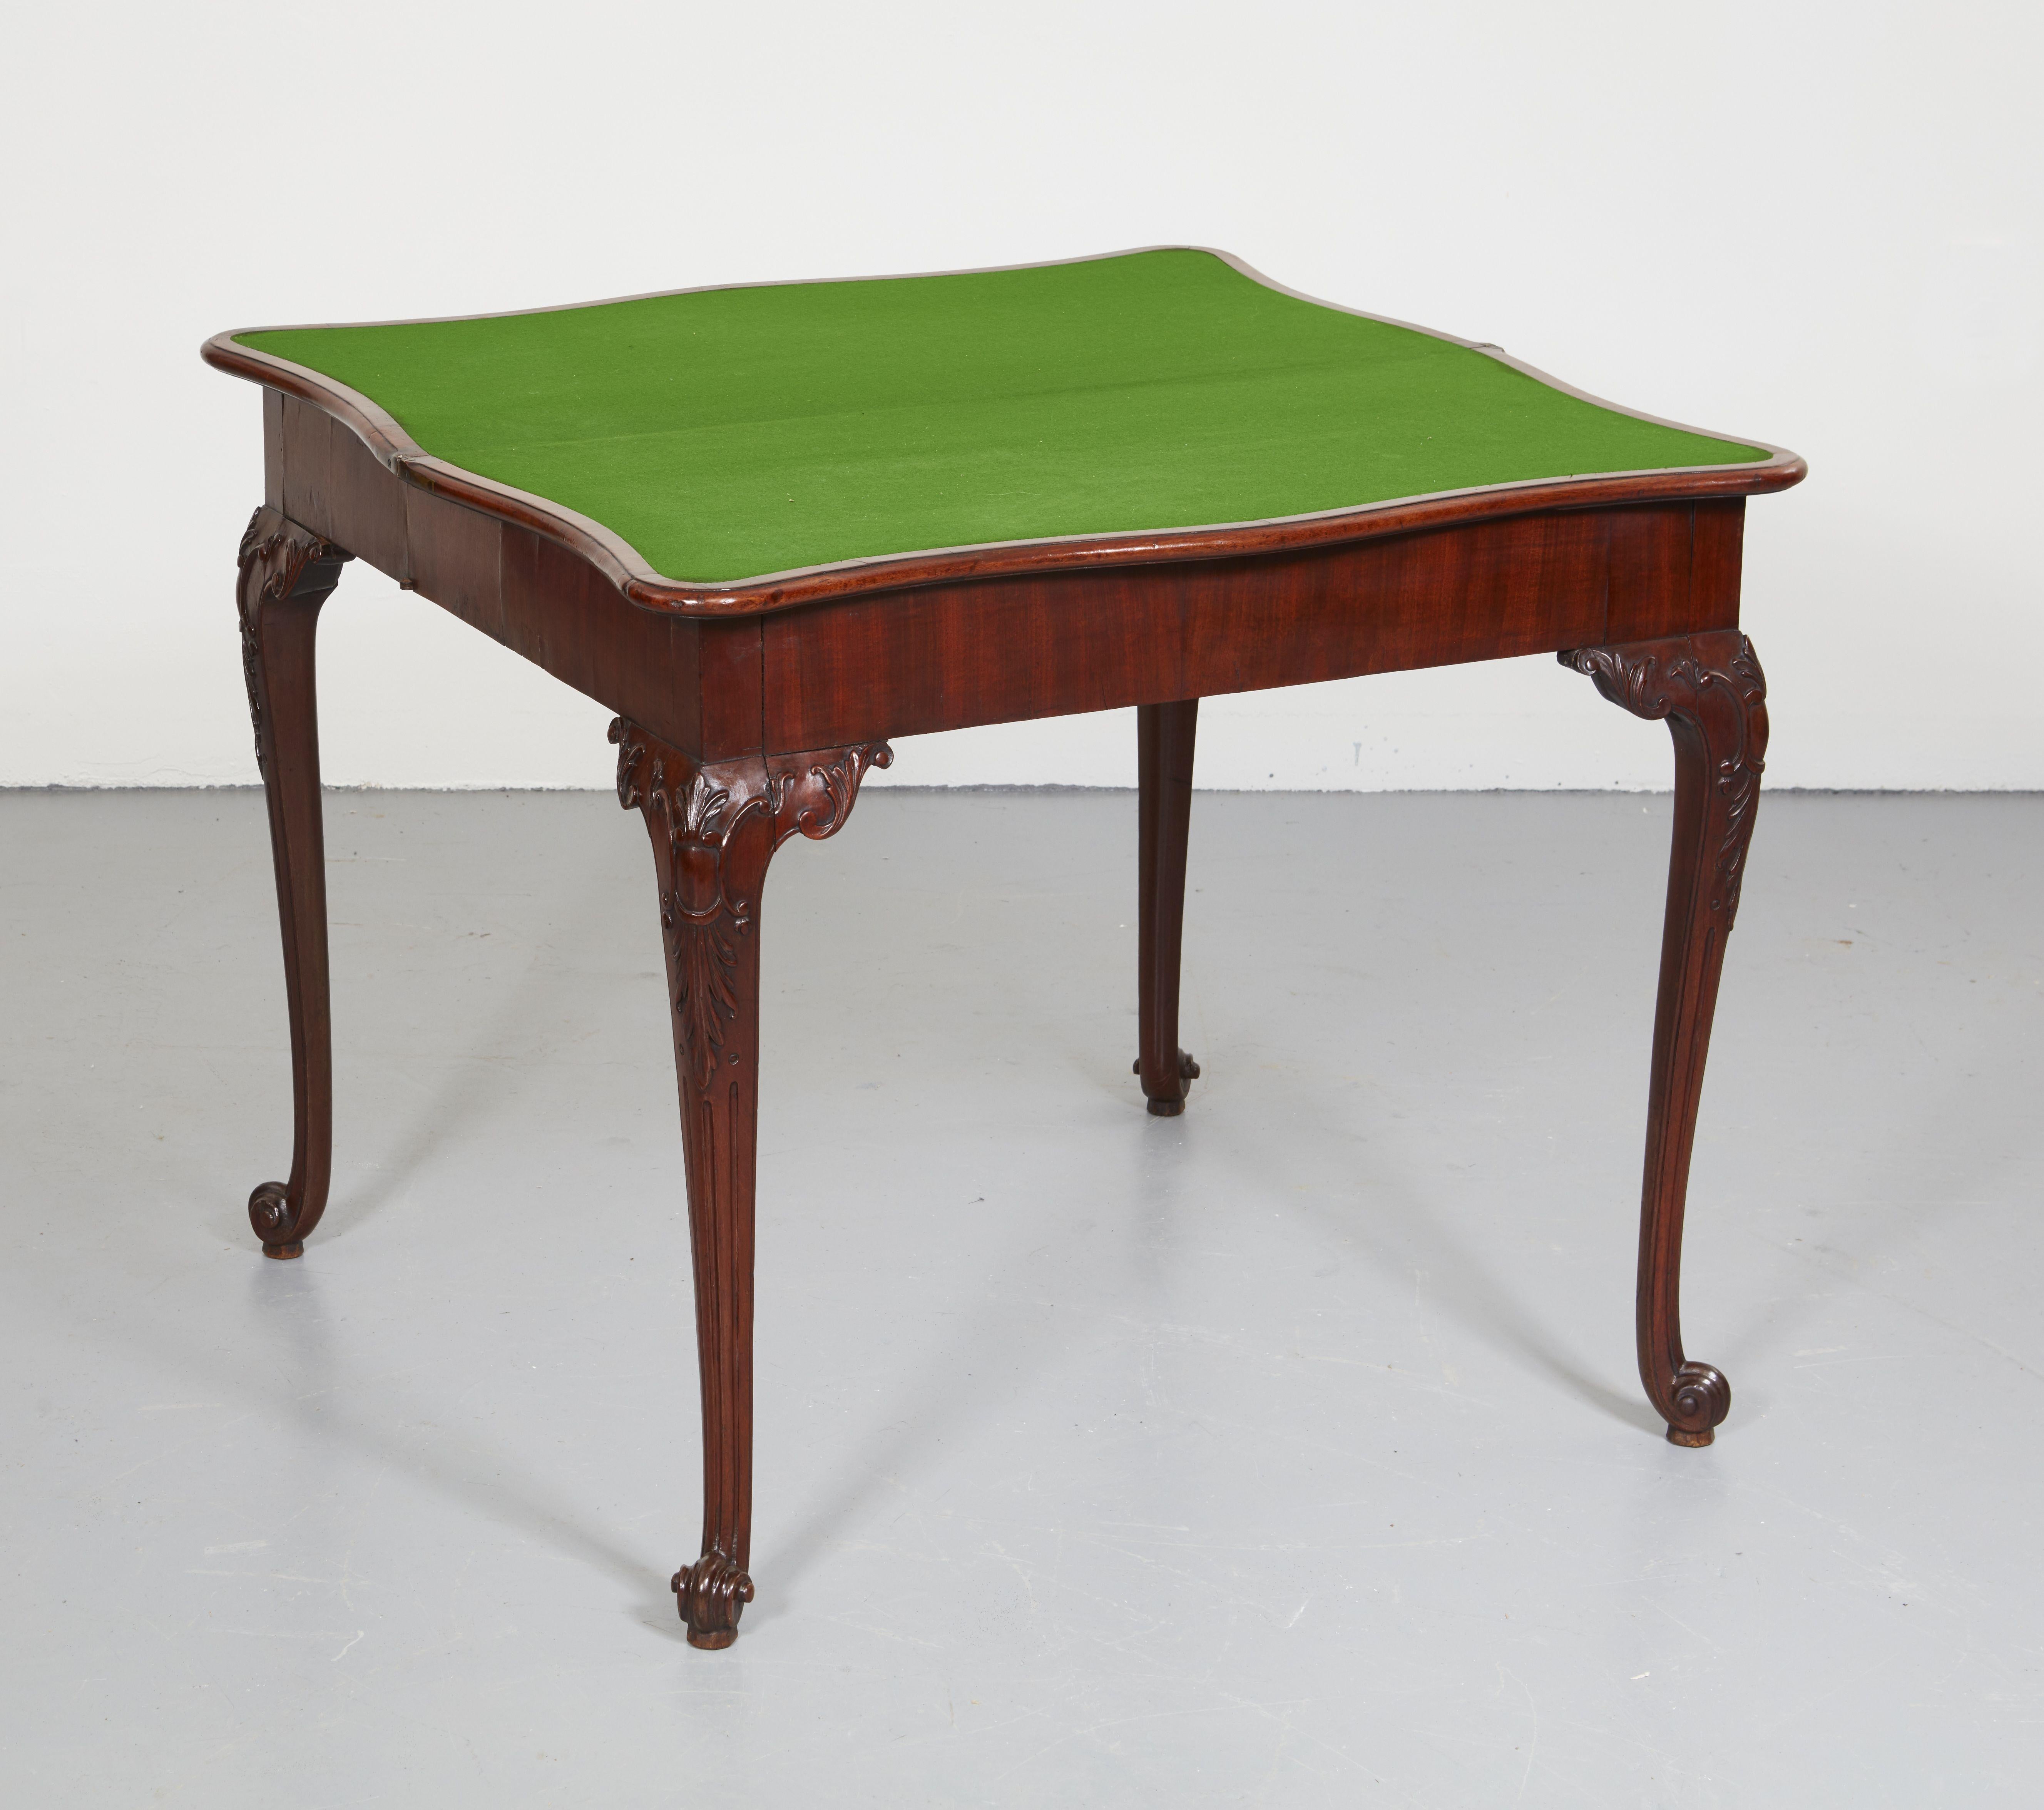 Very fine Georgian mahogany card table possibly by Paul Saunders, with shaped and molded serpentine top with baize lined interior and concertina action, the accordian sides with fine hinges stamped 